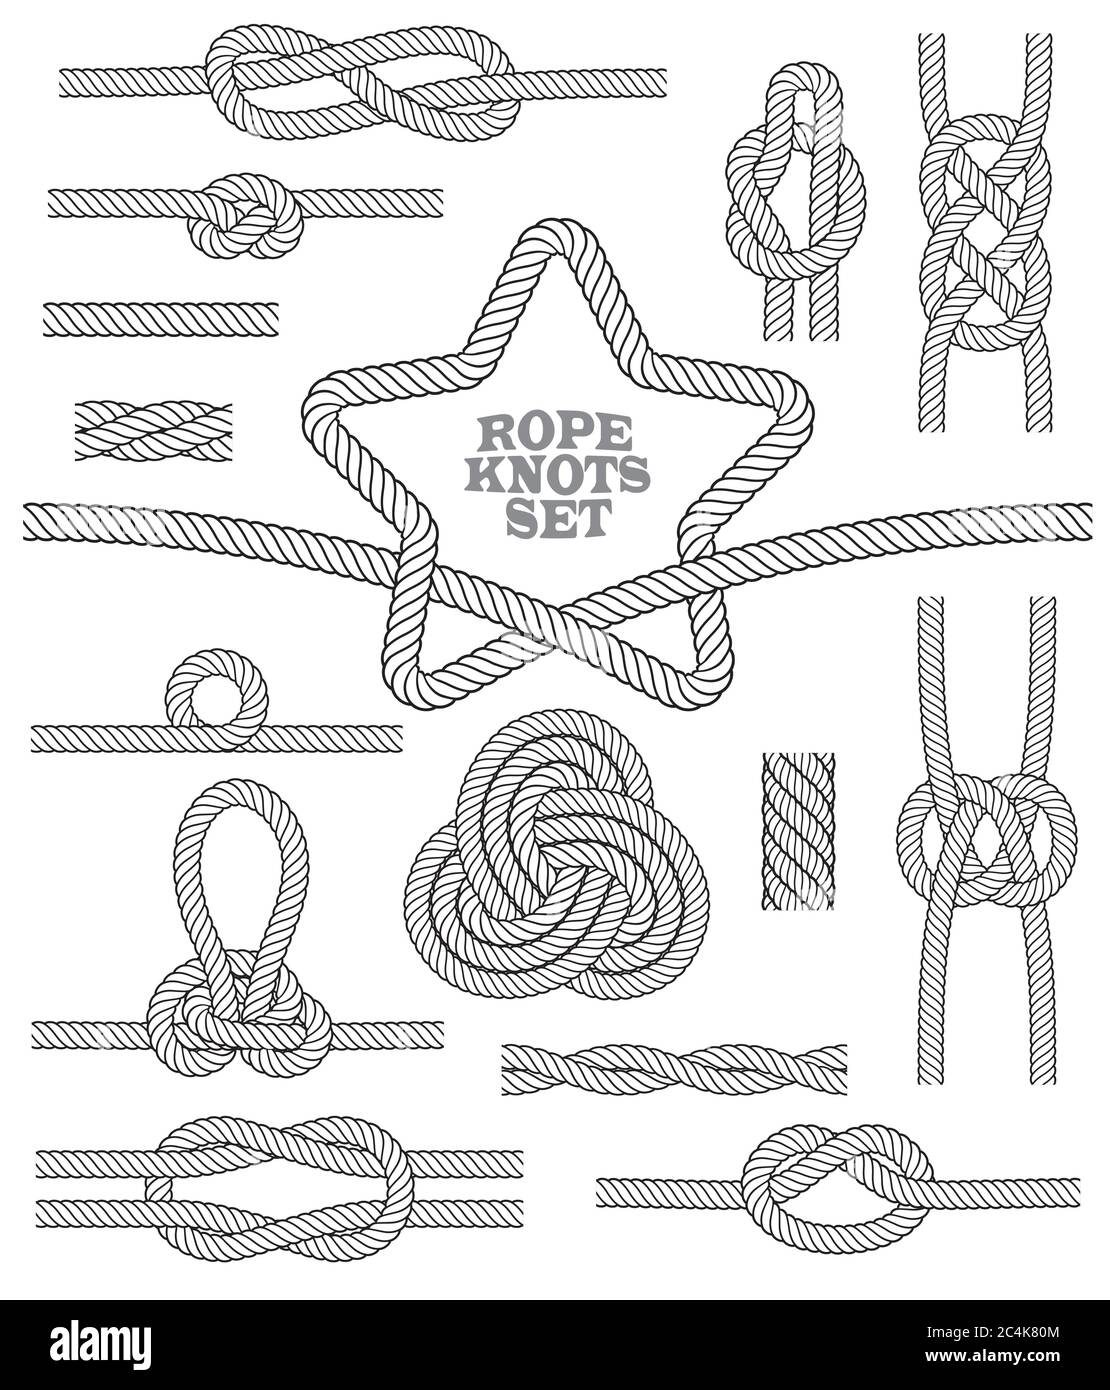 Set of rope knots and rug. Seamless decorative elements. Vector illustration. Stock Vector